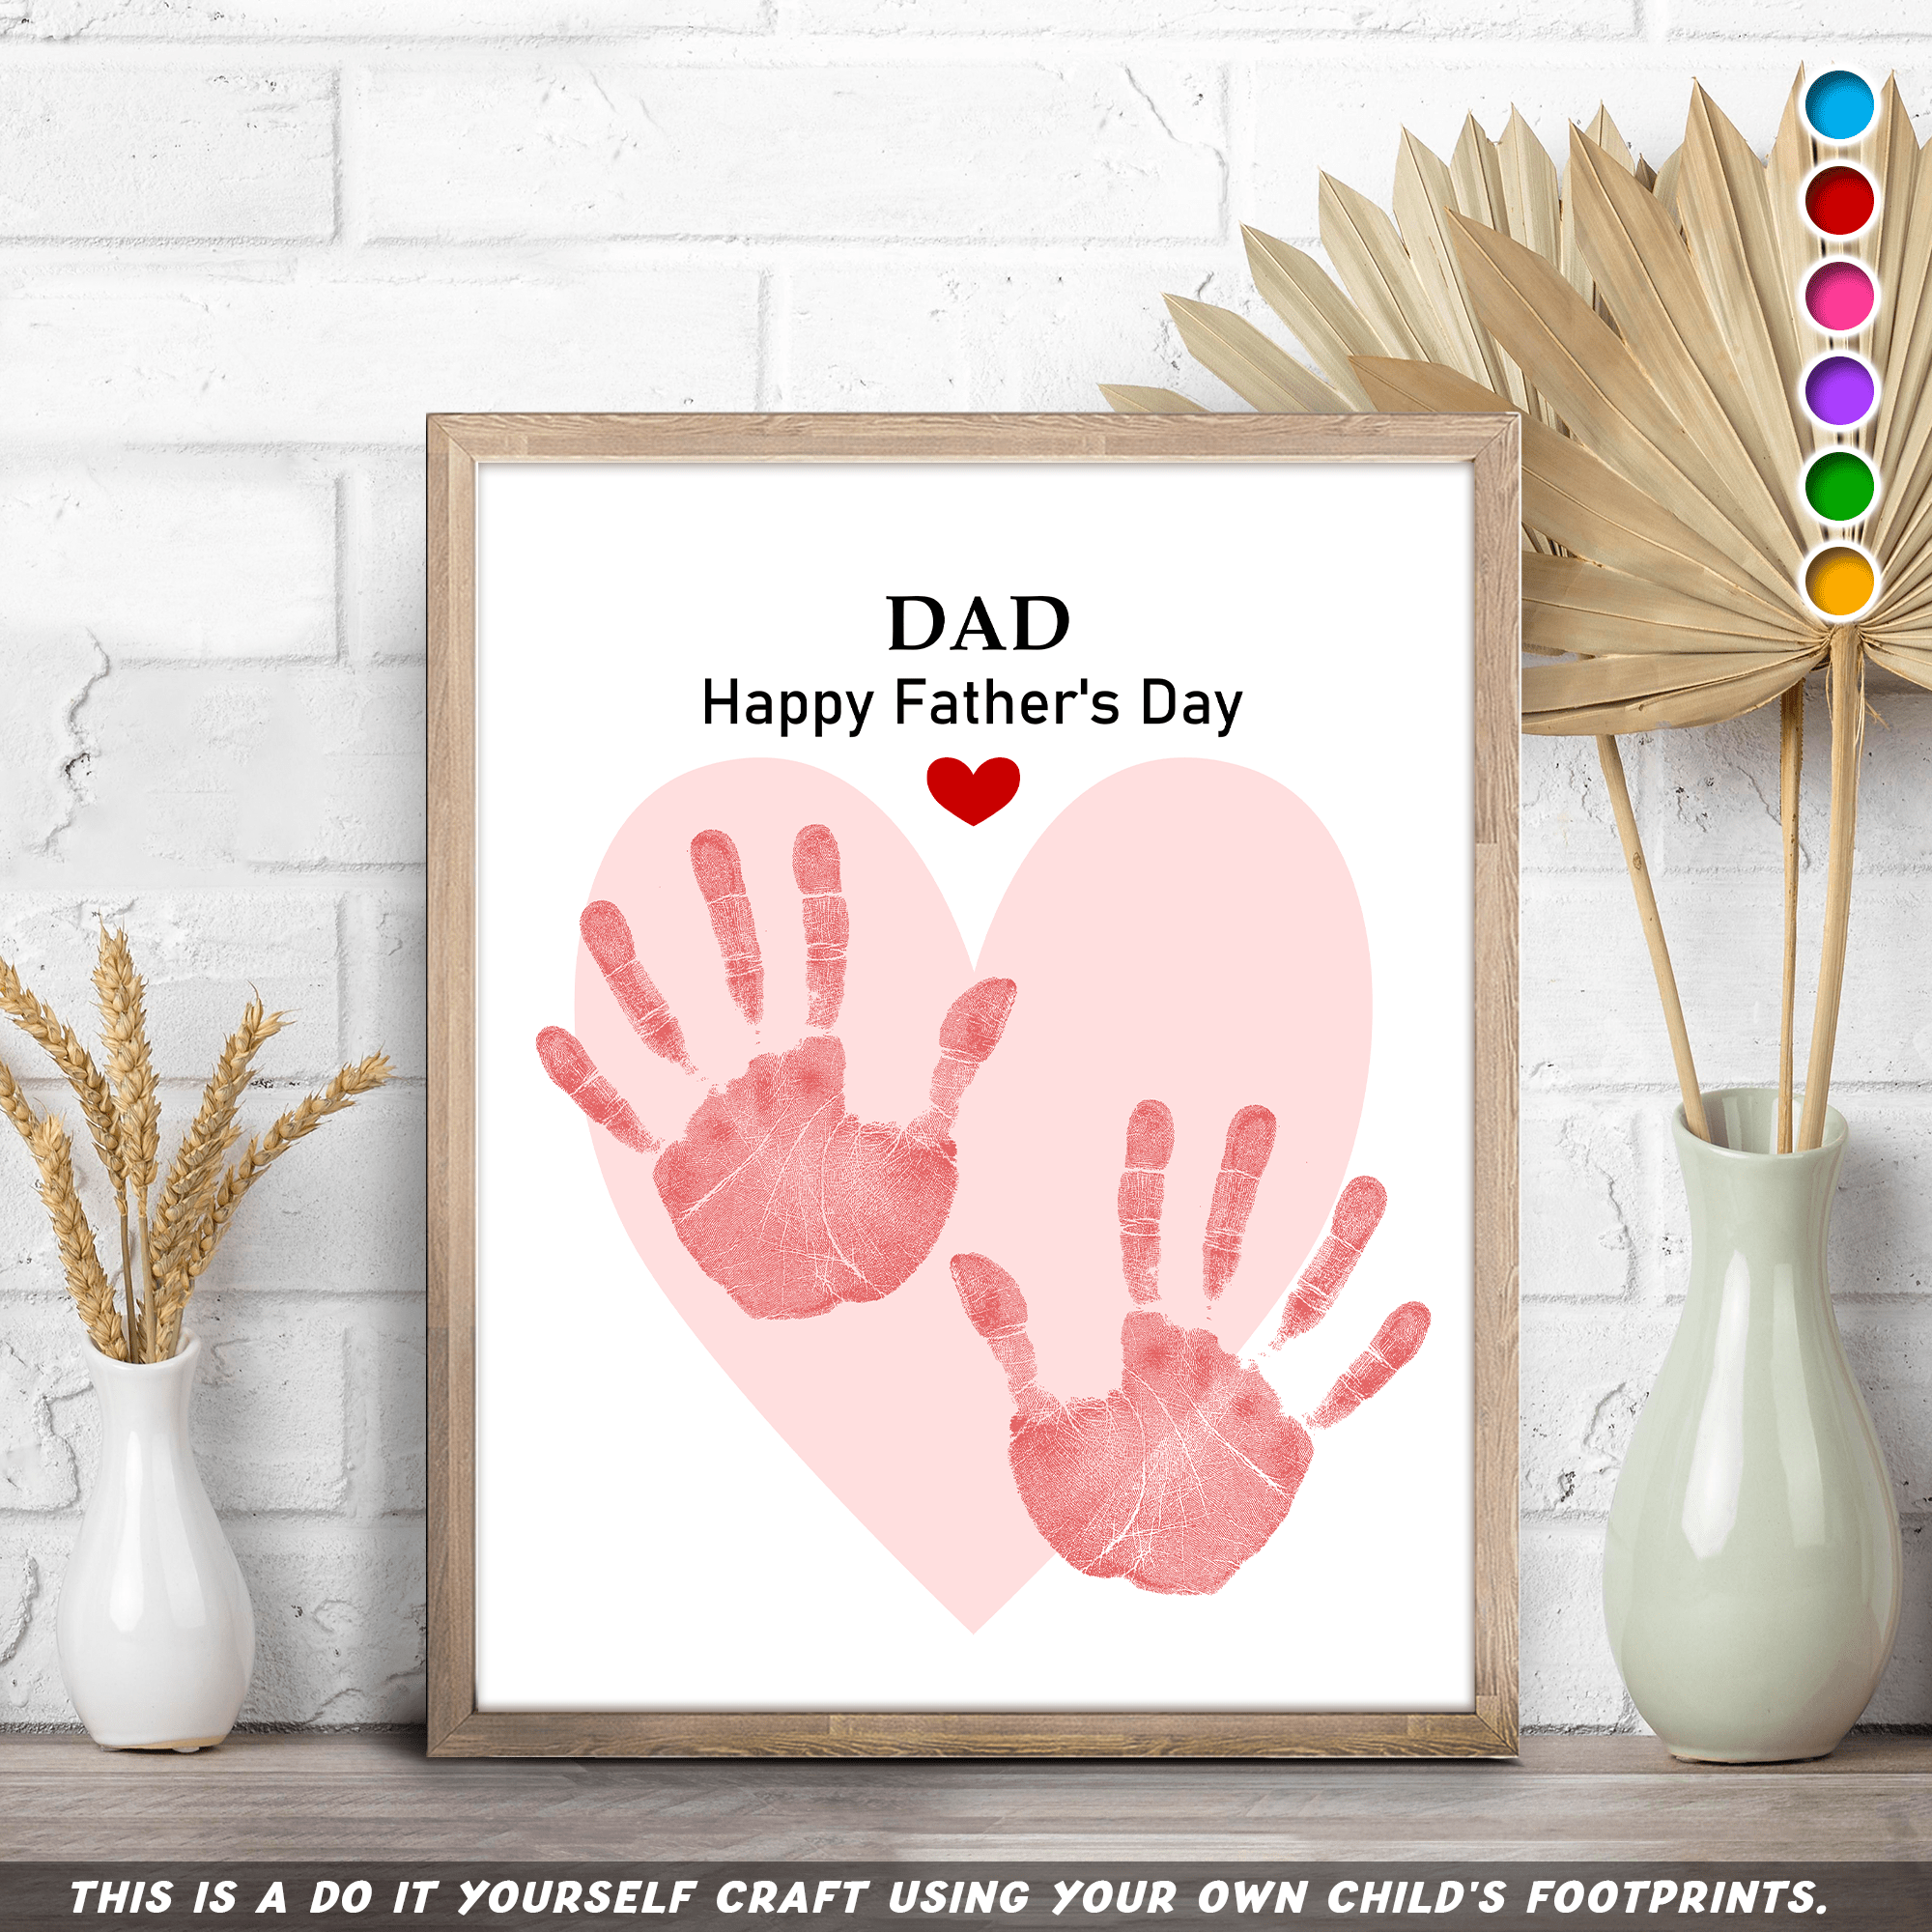 GeckoCustom Dad Happy Father's Day With DIY Handprint Picture Frame HO82 890590